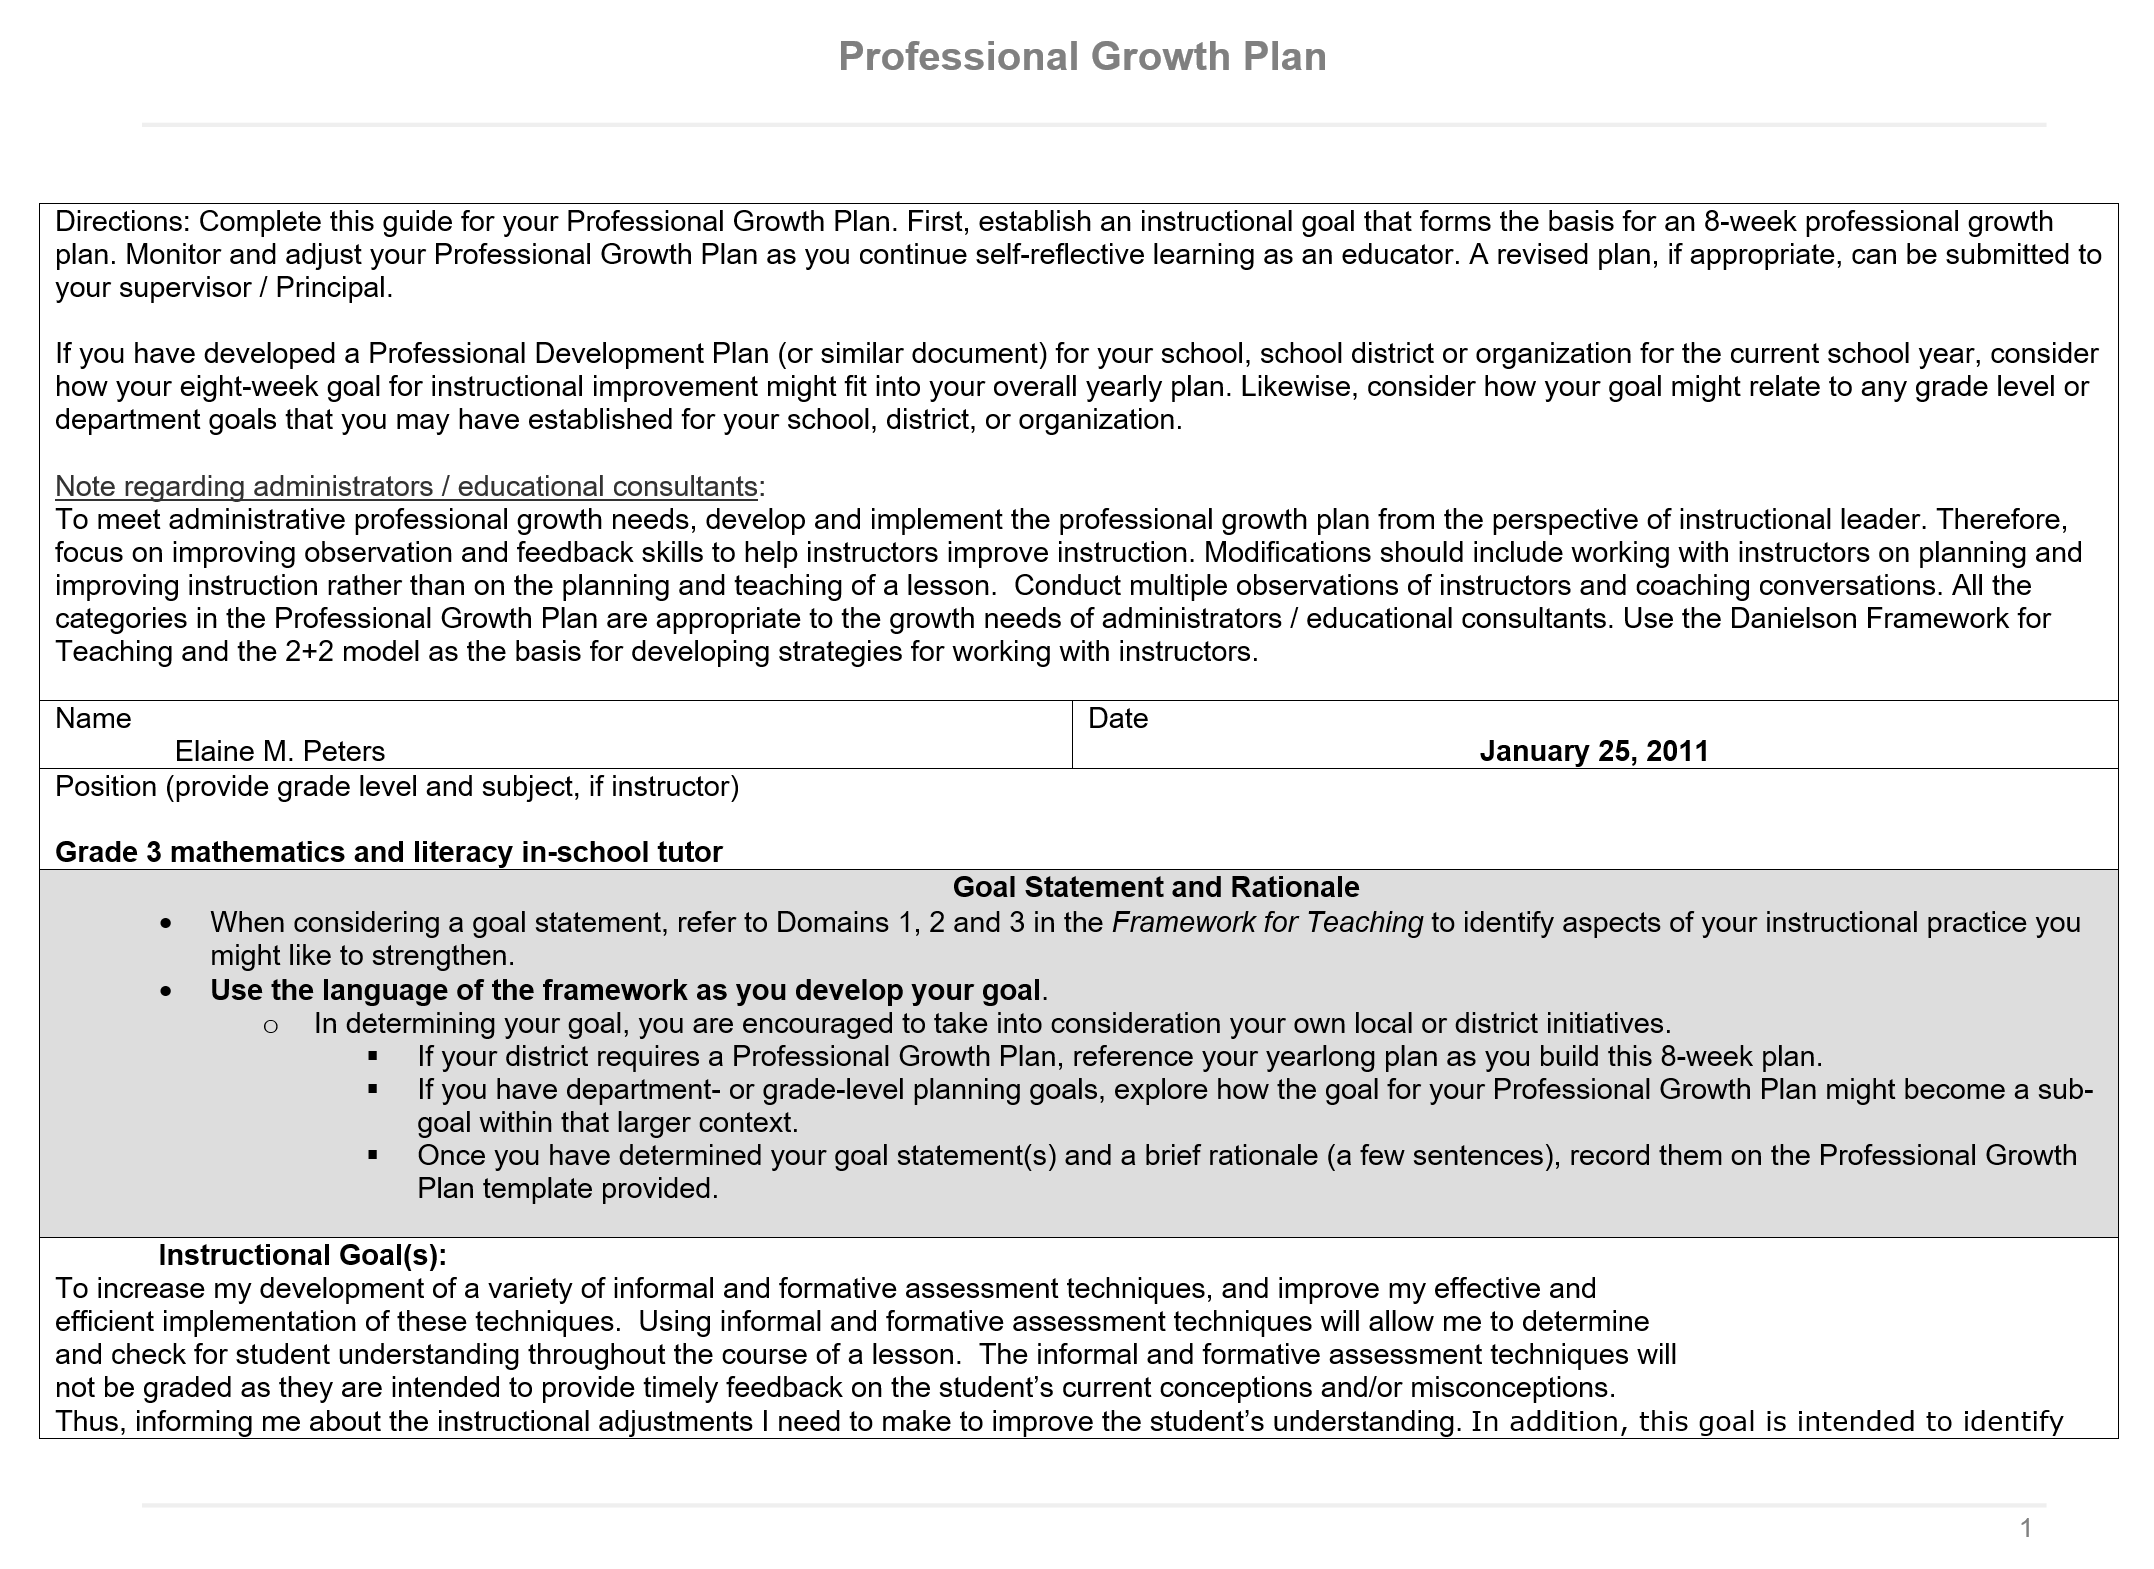 professional growth plan p 1 of 7.PNG